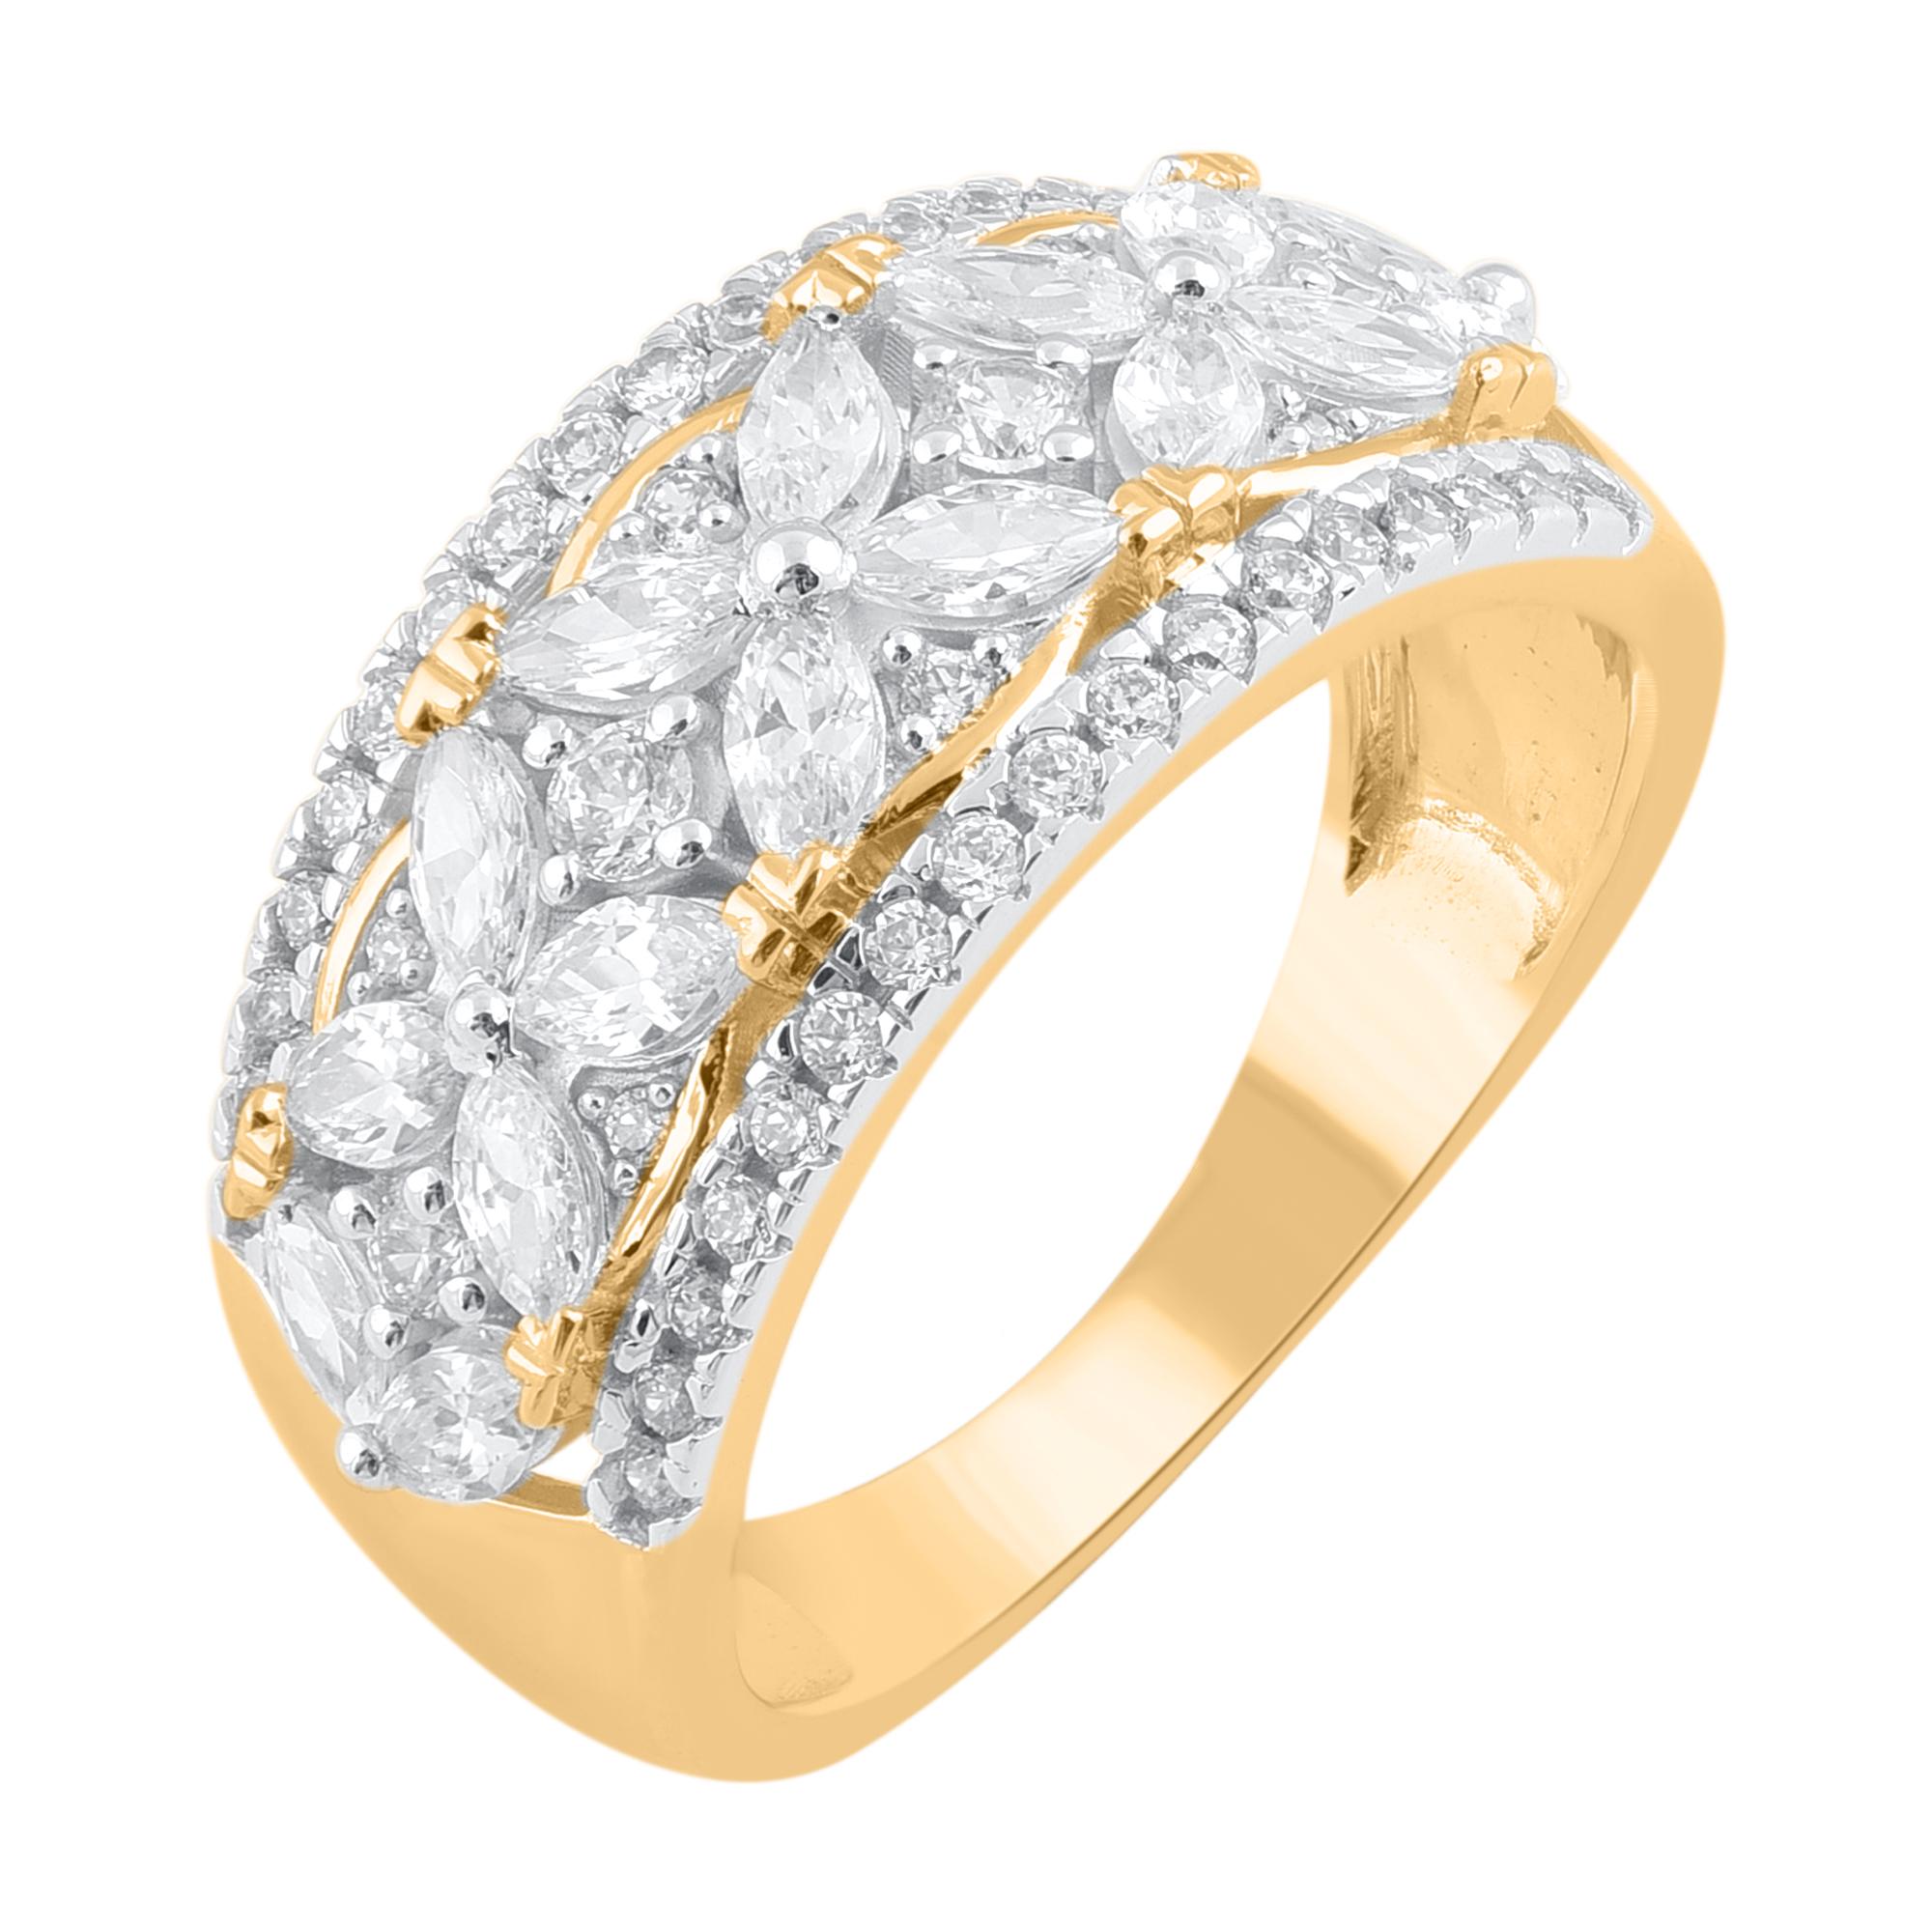 Complete your bridal look with a timeless design. These wedding band rings are studded with 60 brilliant cut, single cut & marquise natural diamonds in prong setting and crafted in 18 Karat yellow gold. The total diamond weight is 1.50 carat. The